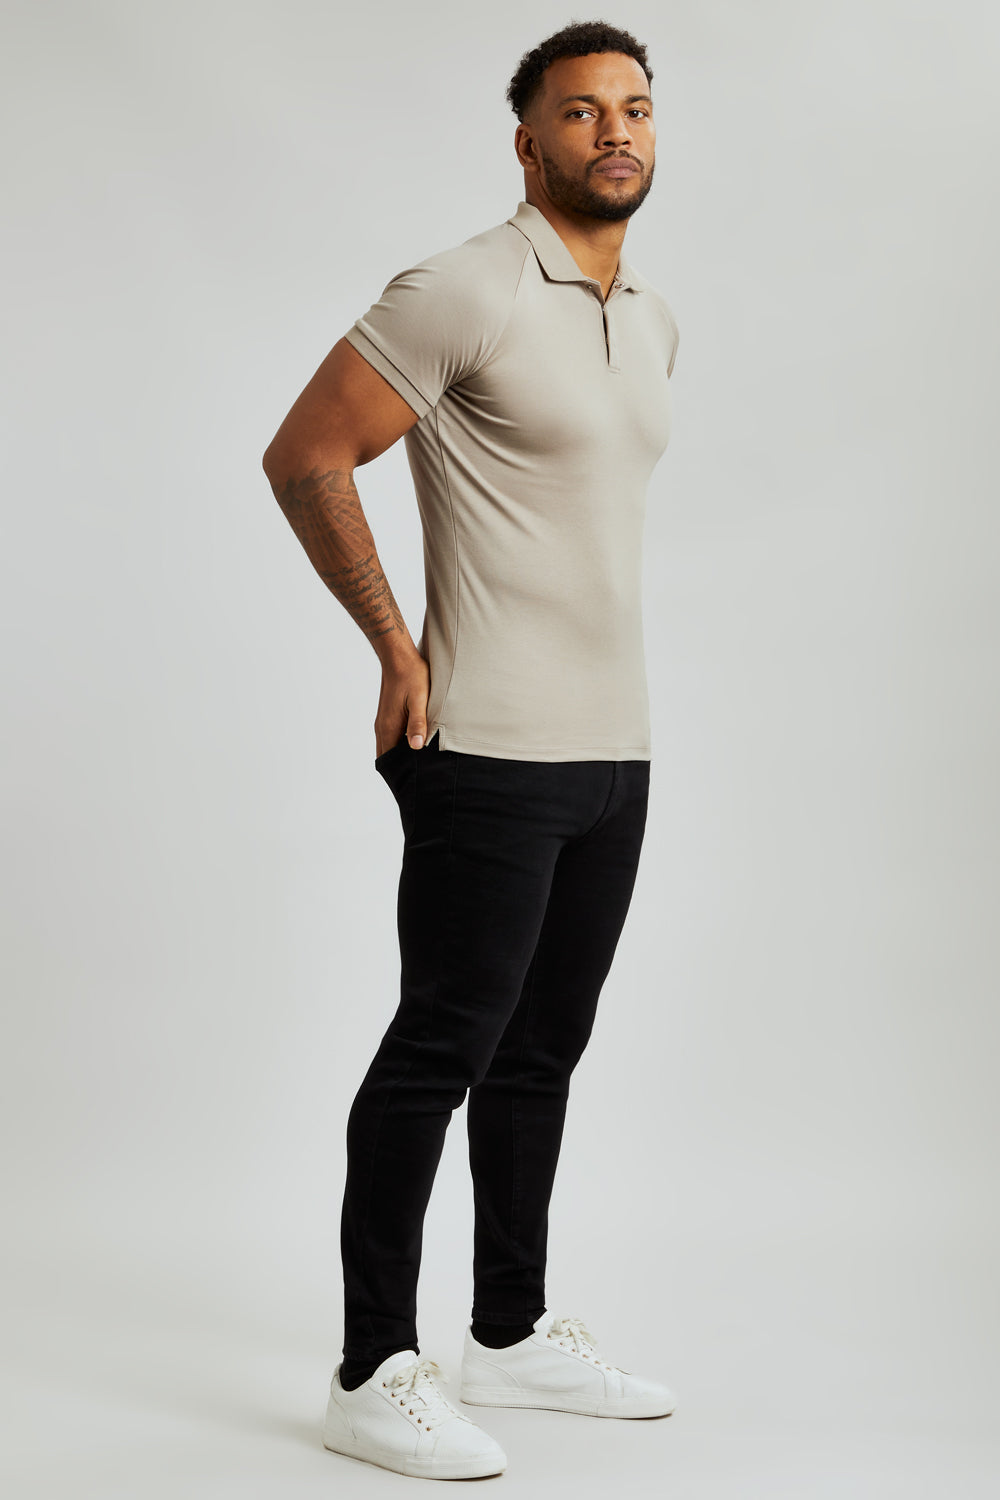 Athletic Fit Polo Shirts - Tailored Athlete - TAILORED ATHLETE